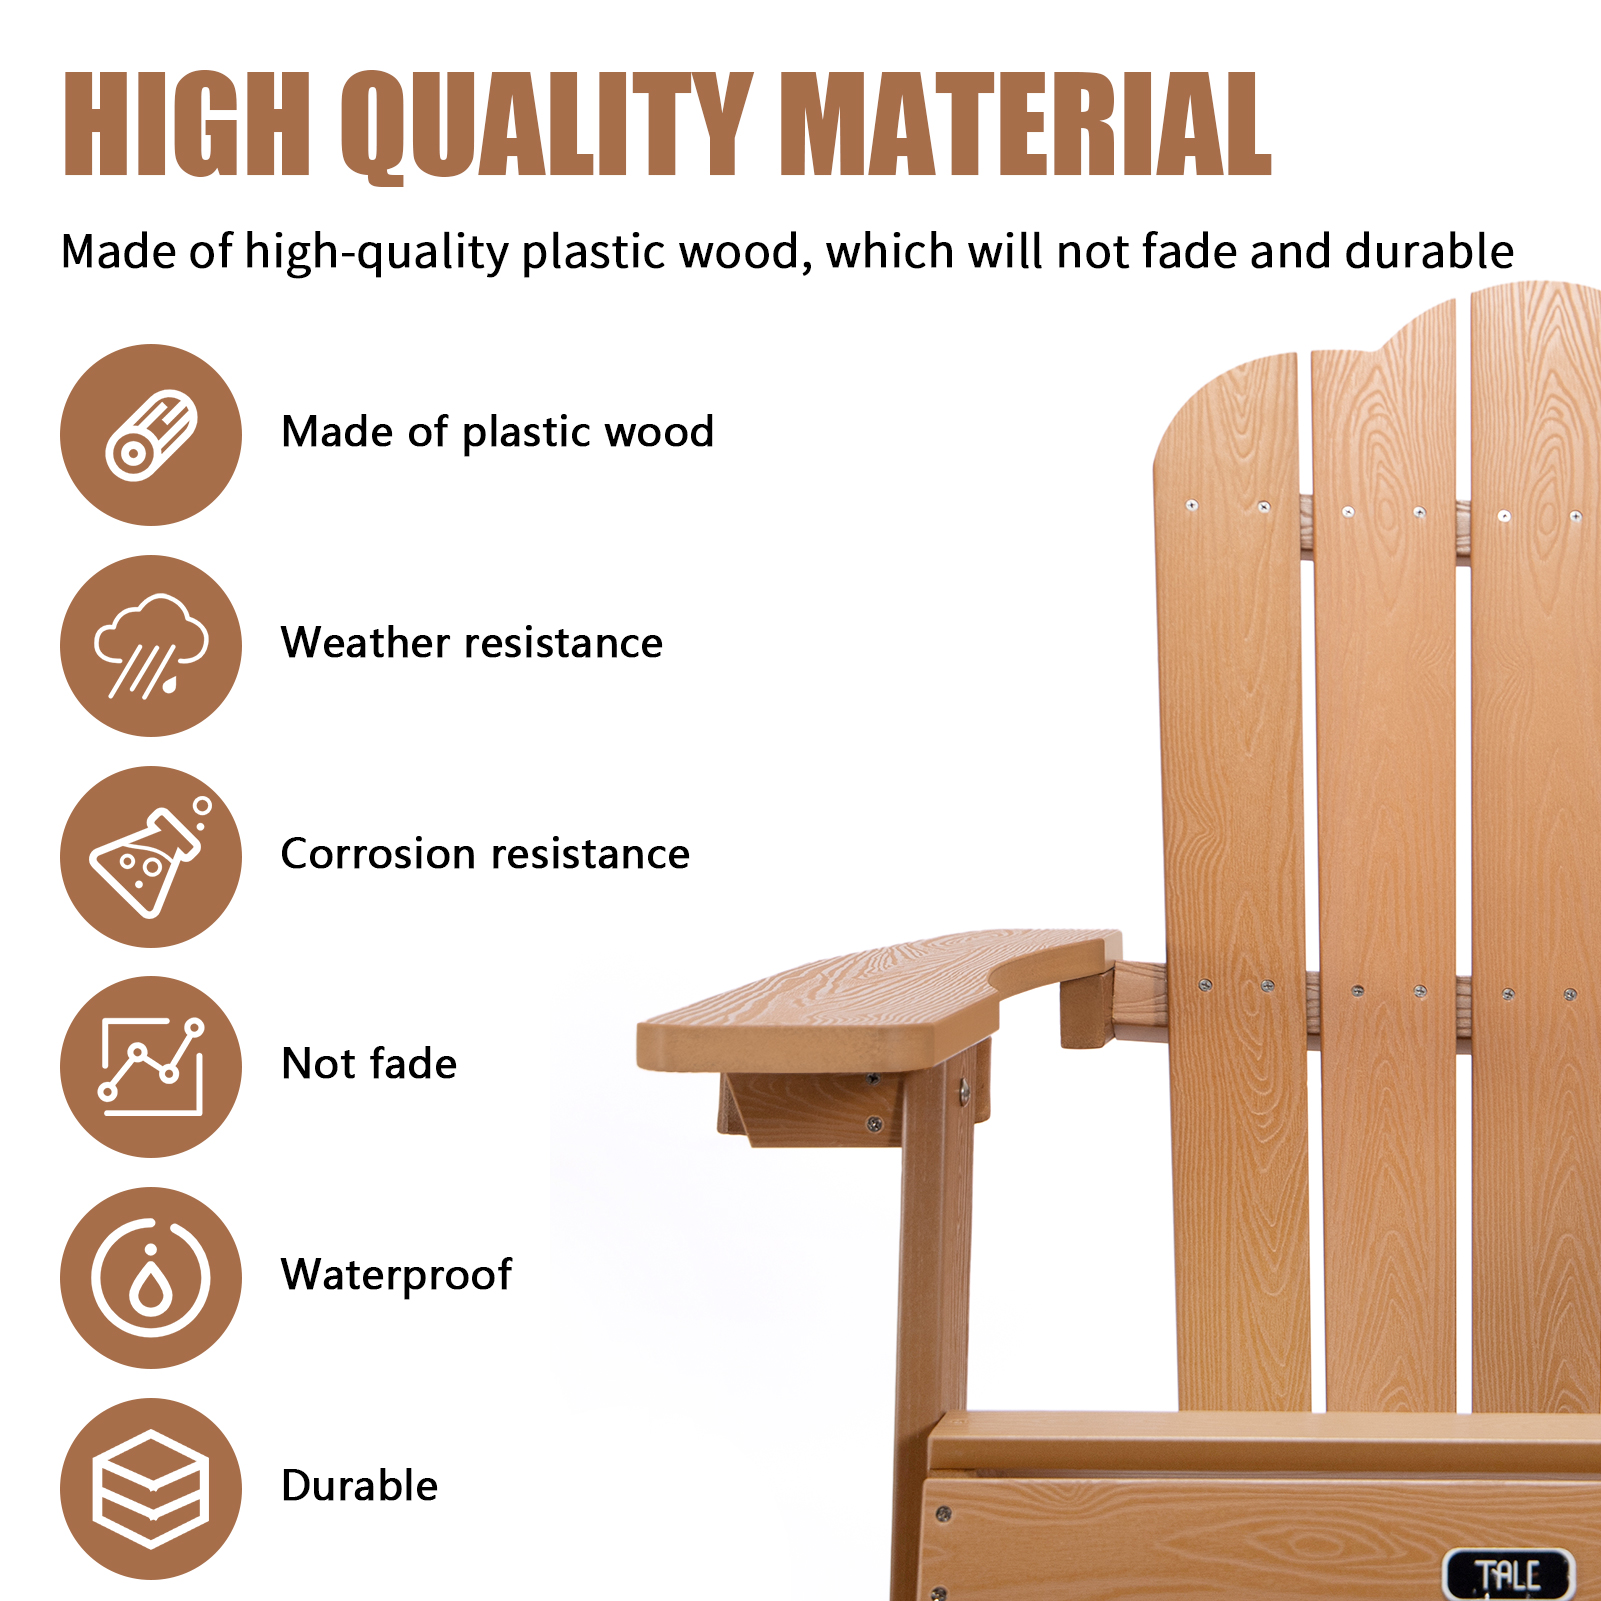 Sportaza Chair Backyard Outdoor Furniture Painted Seating with Cup Holder All-Weather and Fade-Resistant Plastic Wood for Lawn Patio Deck Garden Porch Lawn Furniture Chairs Brown - image 3 of 7